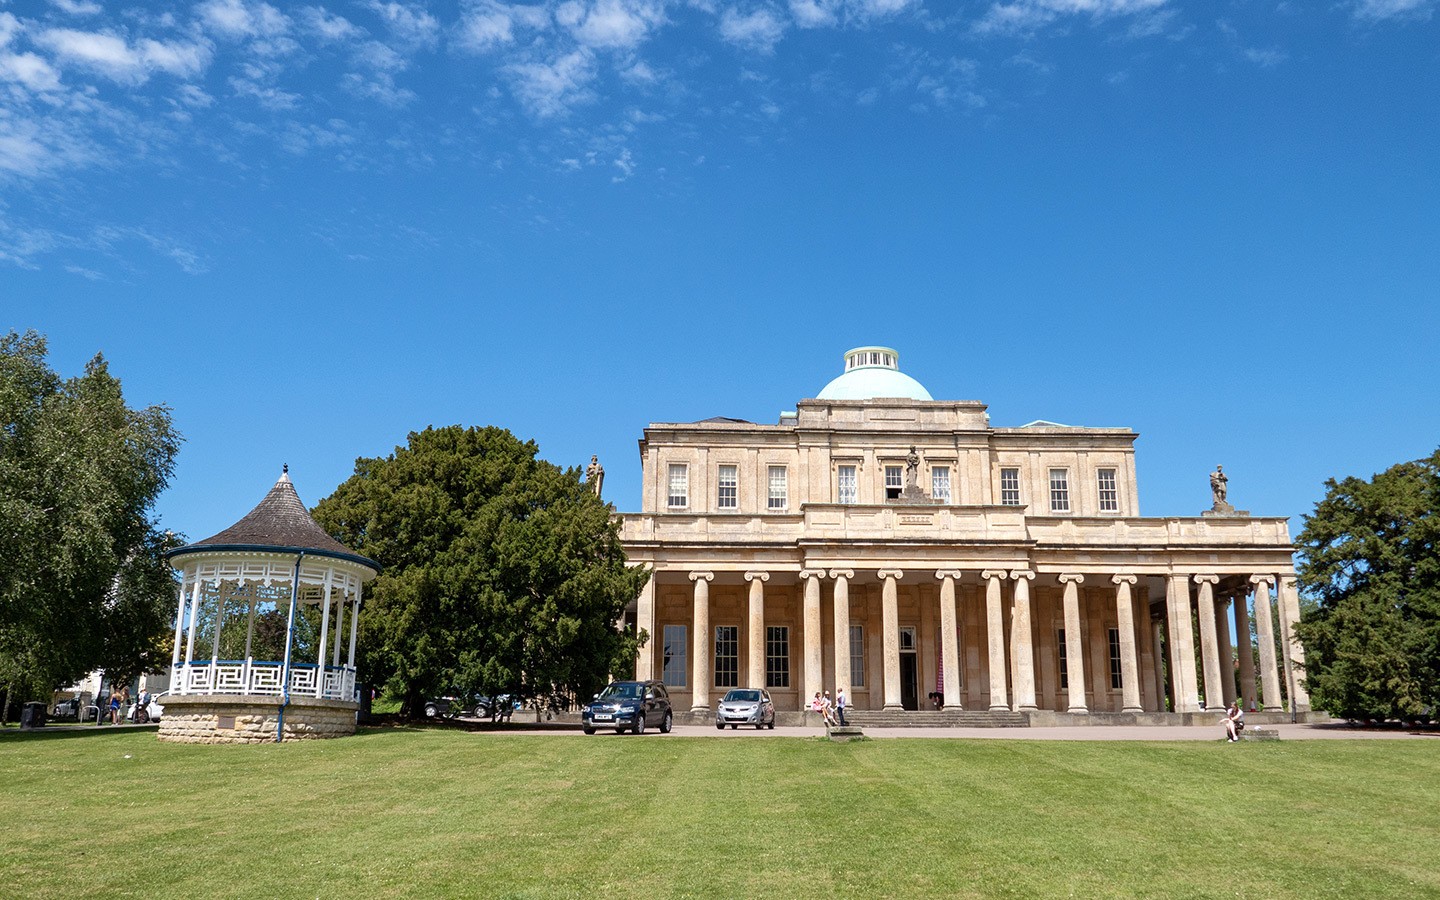 The Pittville Pump Room and park in Cheltenham